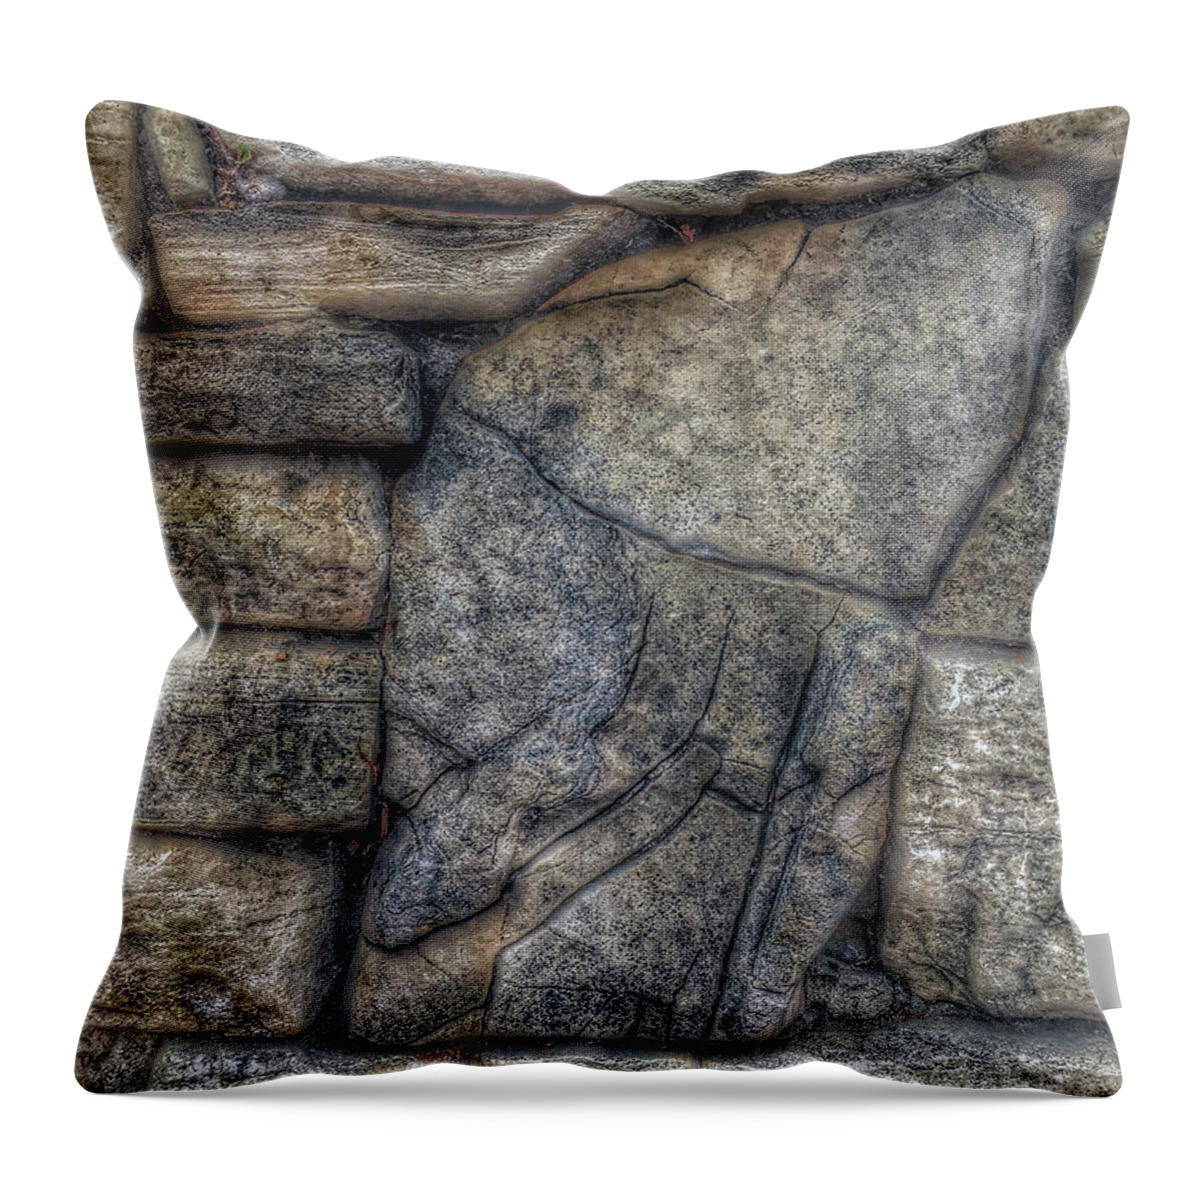 Painterly Iphoneography Throw Pillow featuring the photograph Rock Wall by Bill Owen